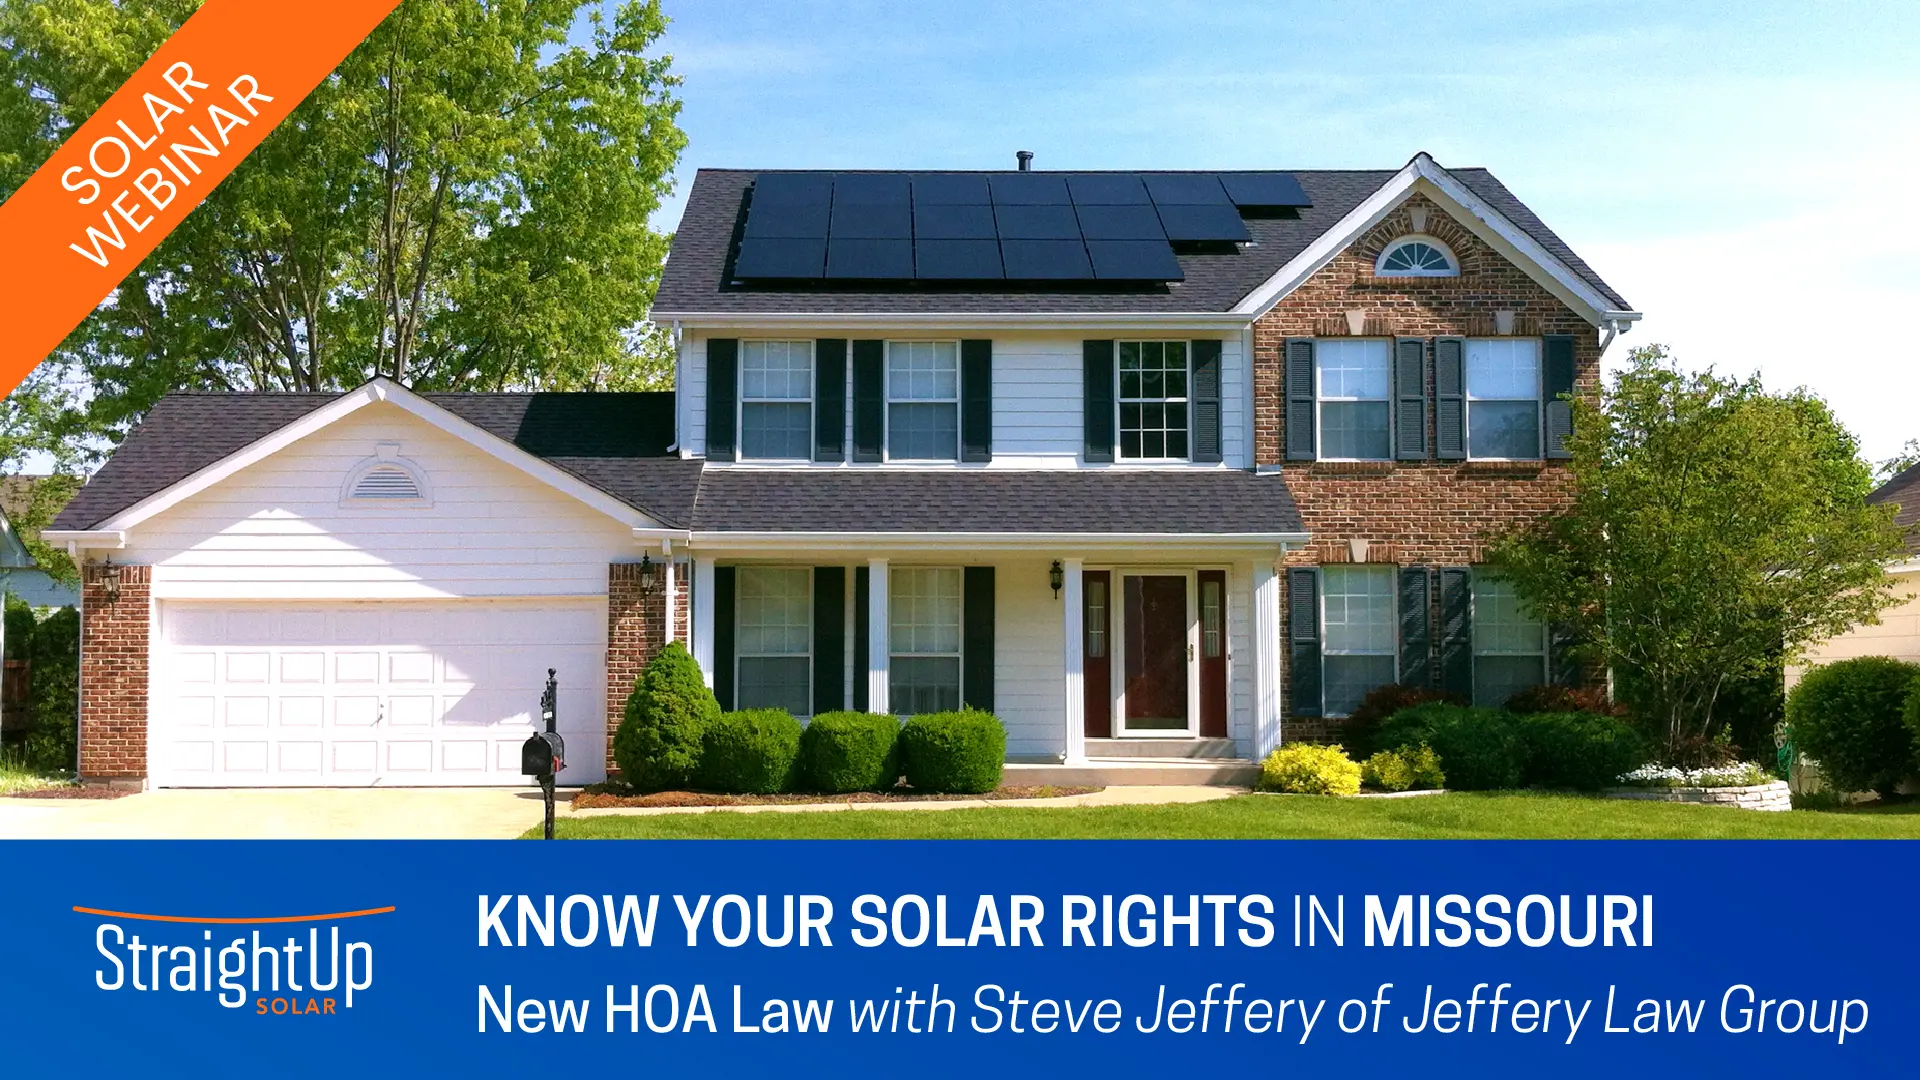 are solar panels worth it in missouri - What is the law on solar panels in Missouri